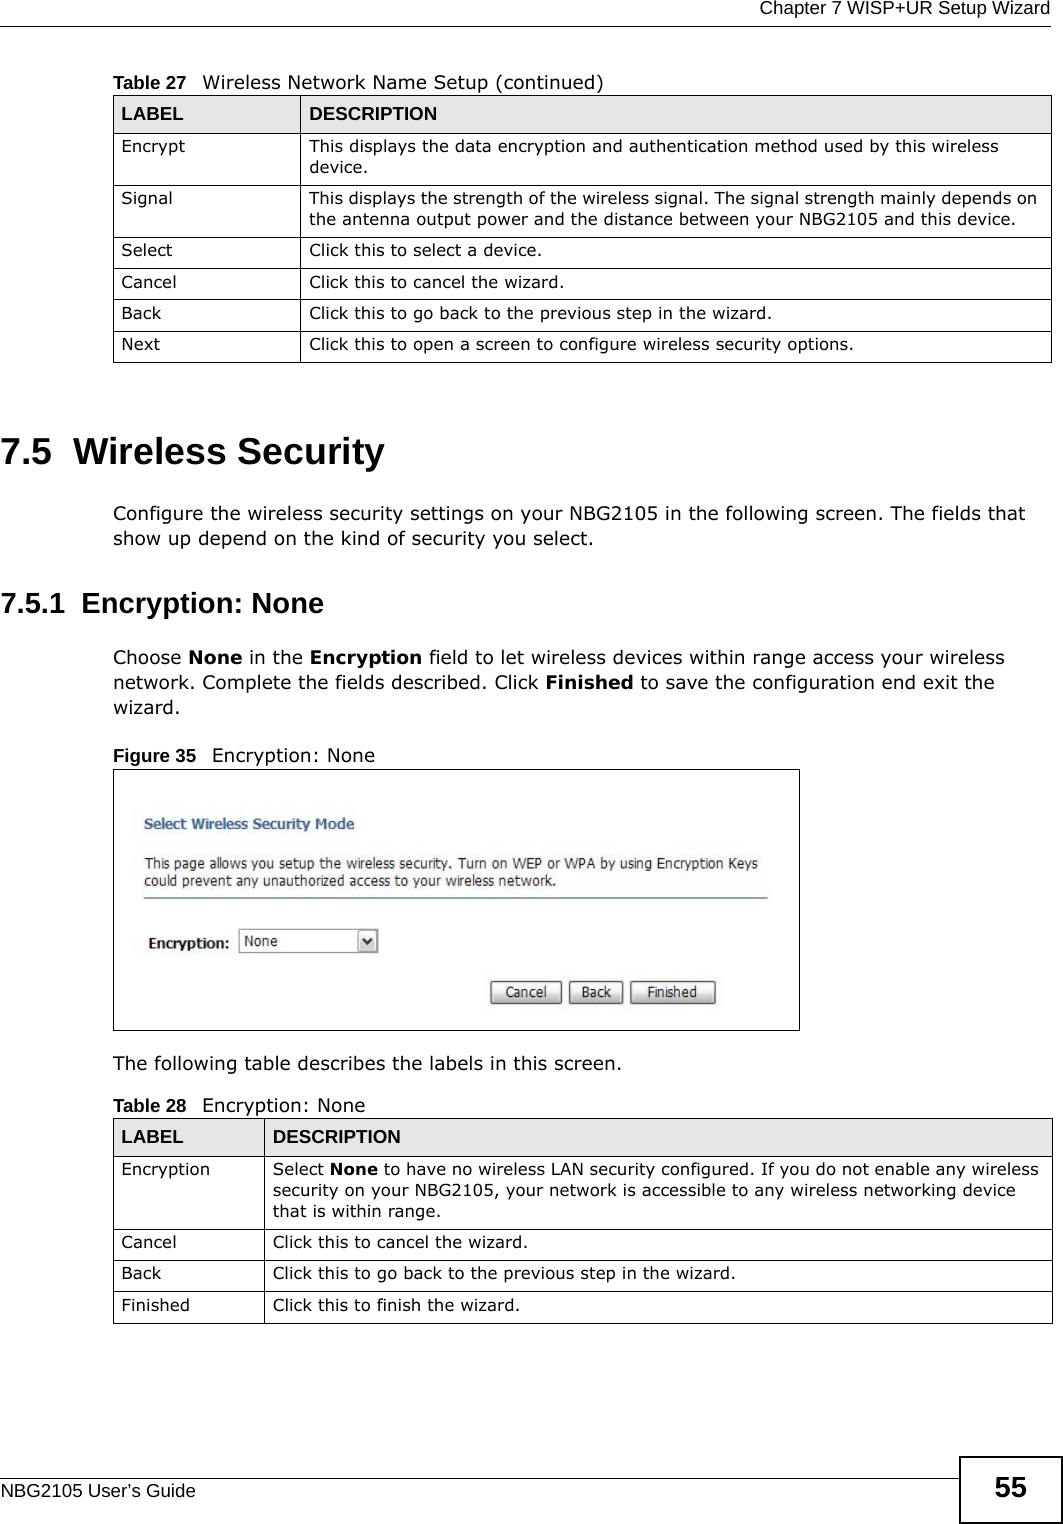  Chapter 7 WISP+UR Setup WizardNBG2105 User’s Guide 557.5  Wireless SecurityConfigure the wireless security settings on your NBG2105 in the following screen. The fields that show up depend on the kind of security you select.7.5.1  Encryption: NoneChoose None in the Encryption field to let wireless devices within range access your wireless network. Complete the fields described. Click Finished to save the configuration end exit the wizard.Figure 35   Encryption: None The following table describes the labels in this screen.Encrypt This displays the data encryption and authentication method used by this wireless device.Signal This displays the strength of the wireless signal. The signal strength mainly depends on the antenna output power and the distance between your NBG2105 and this device.Select Click this to select a device.Cancel Click this to cancel the wizard.Back Click this to go back to the previous step in the wizard.Next Click this to open a screen to configure wireless security options.Table 27   Wireless Network Name Setup (continued)LABEL DESCRIPTIONTable 28   Encryption: NoneLABEL DESCRIPTIONEncryption Select None to have no wireless LAN security configured. If you do not enable any wireless security on your NBG2105, your network is accessible to any wireless networking device that is within range. Cancel Click this to cancel the wizard.Back Click this to go back to the previous step in the wizard.Finished Click this to finish the wizard.